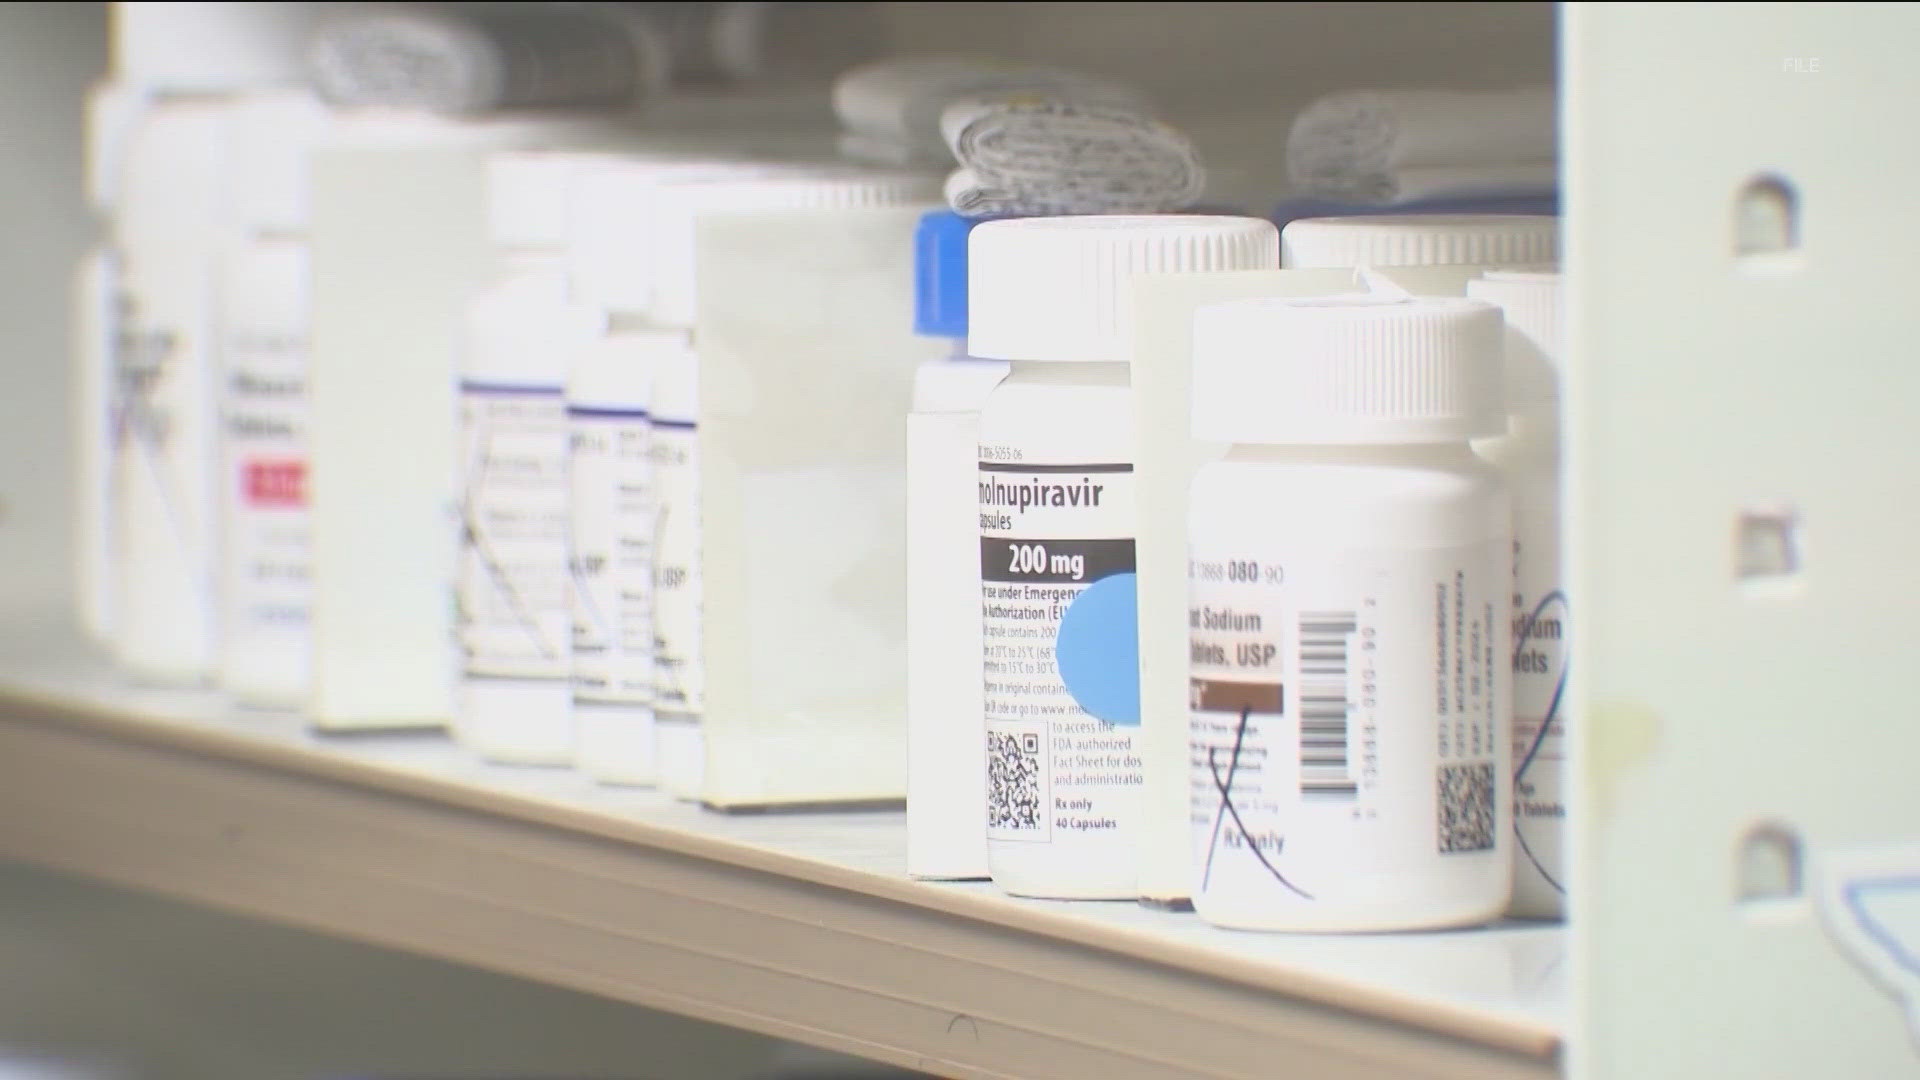 More than 320 prescription drugs are on the list of shortages across the nation.